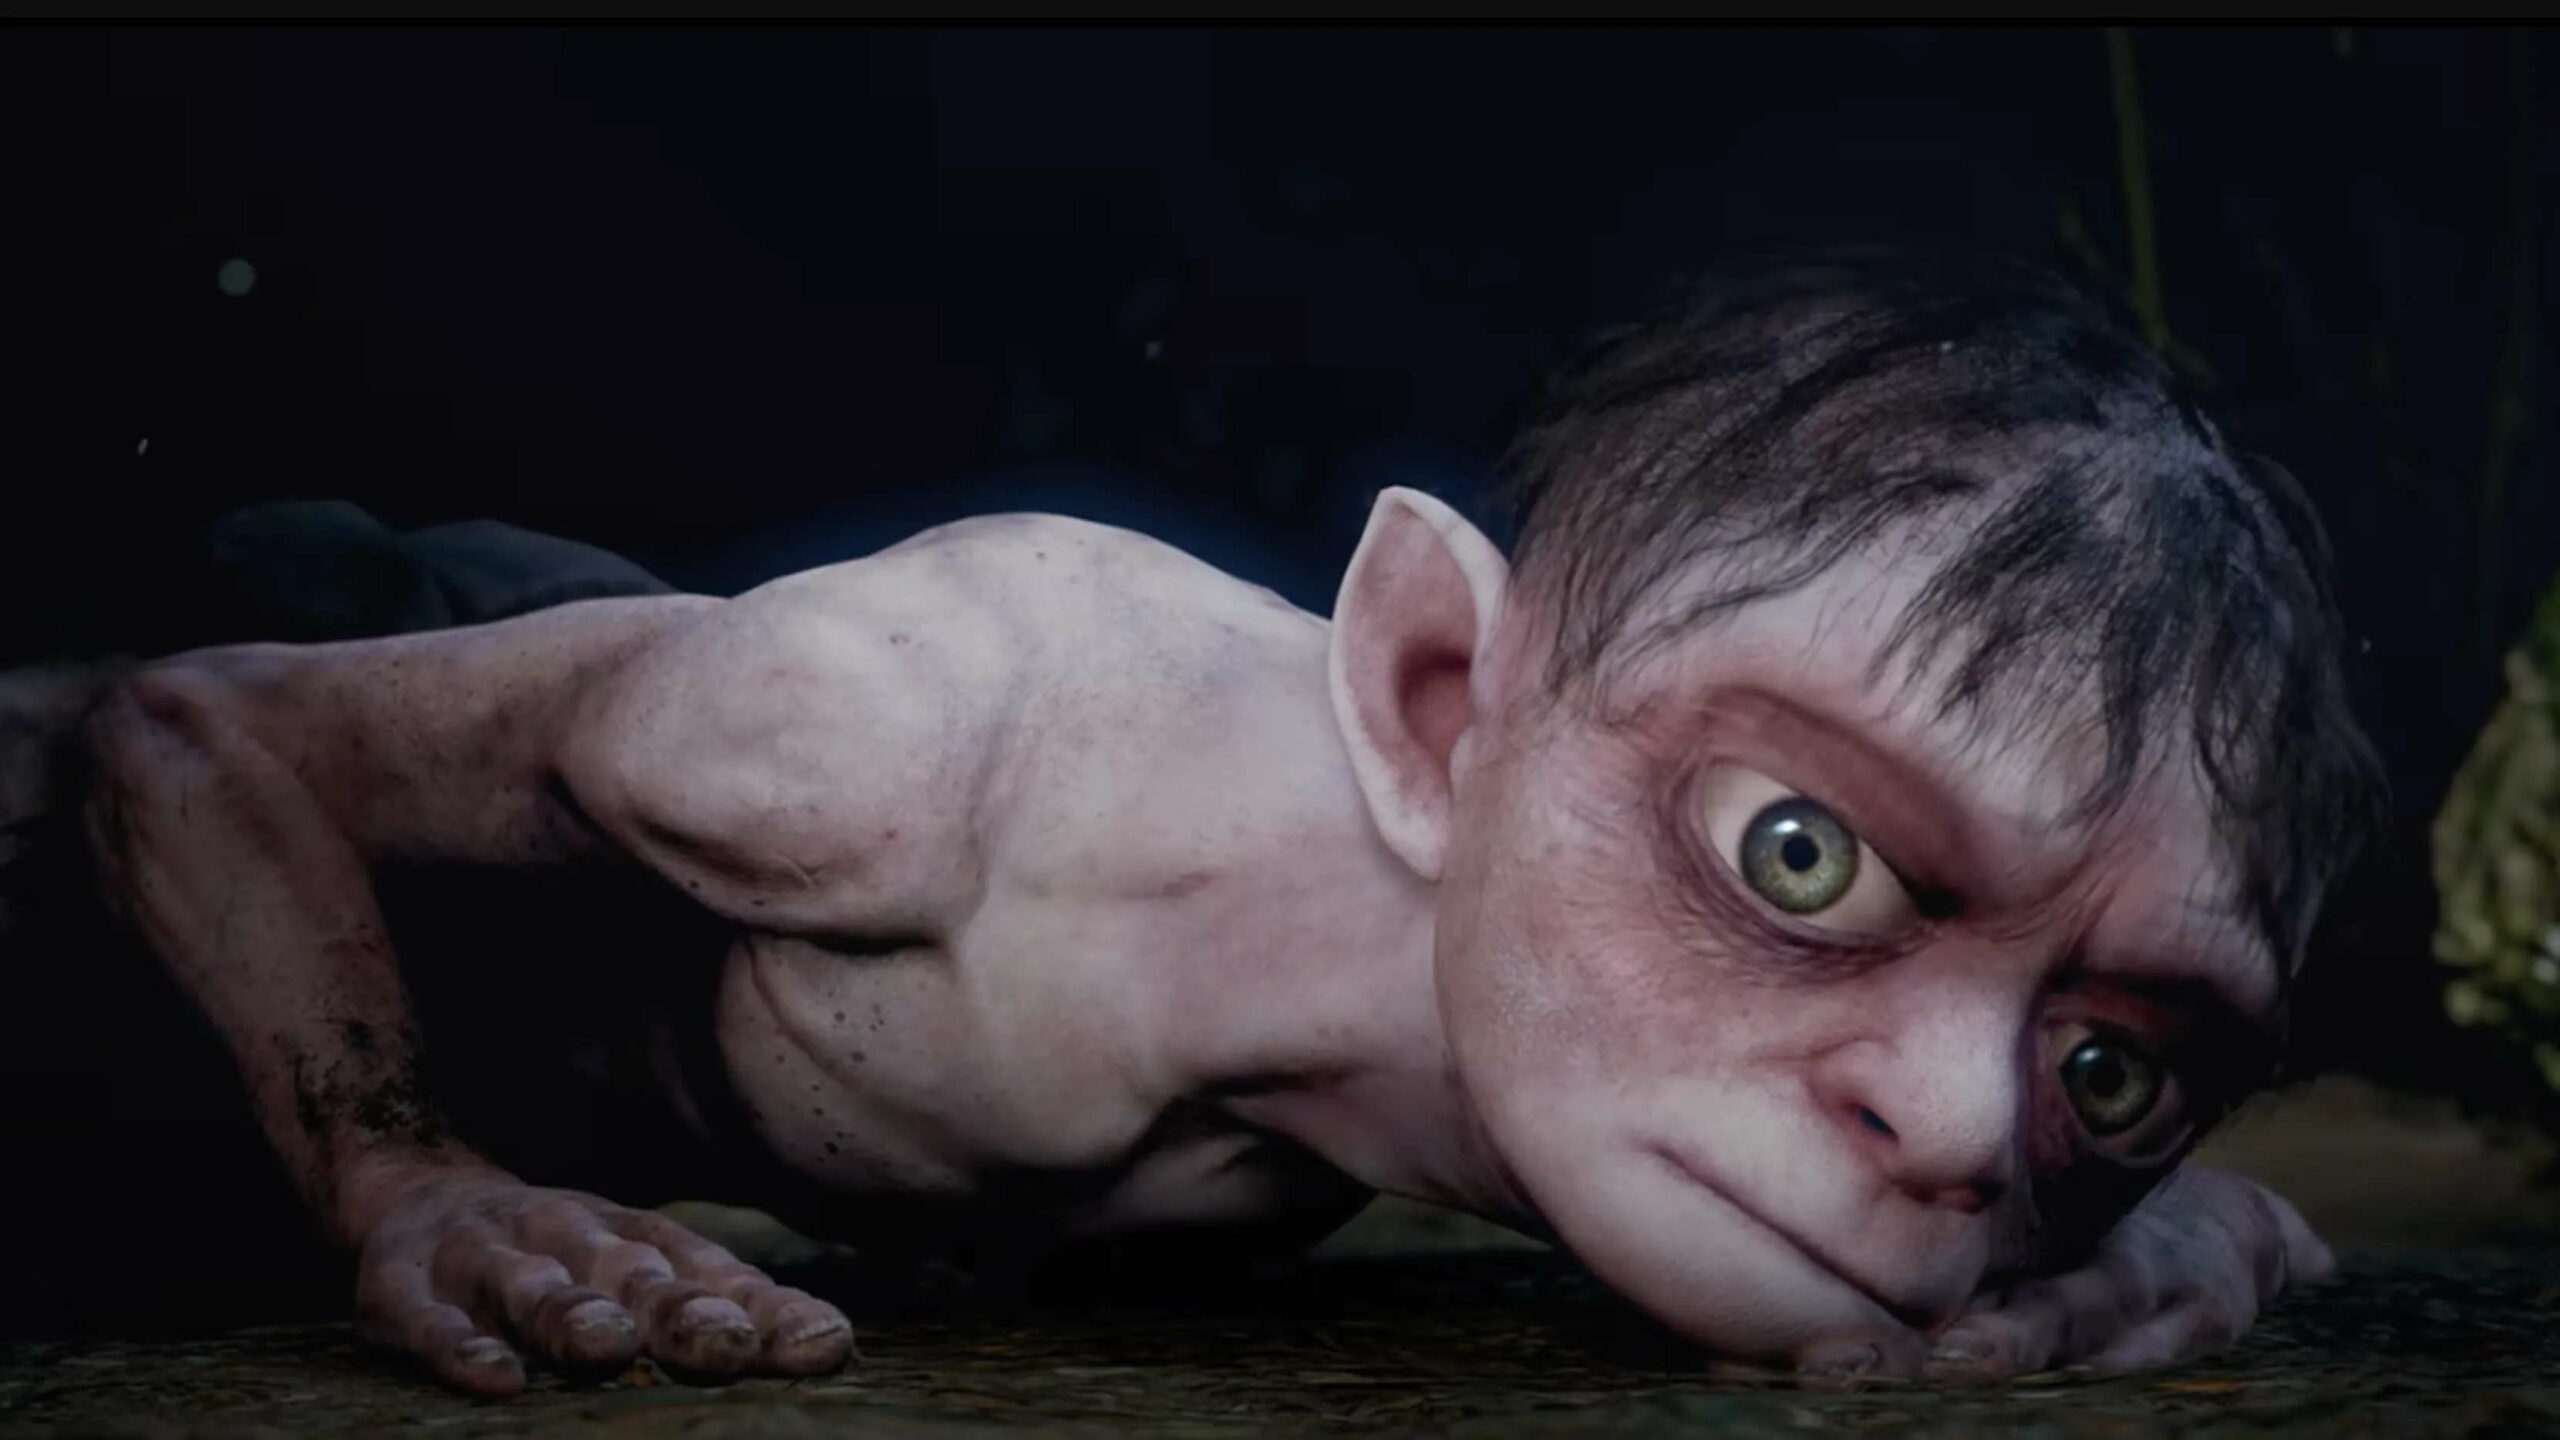 The Lord of The Rings: Gollum is going to be a disaster